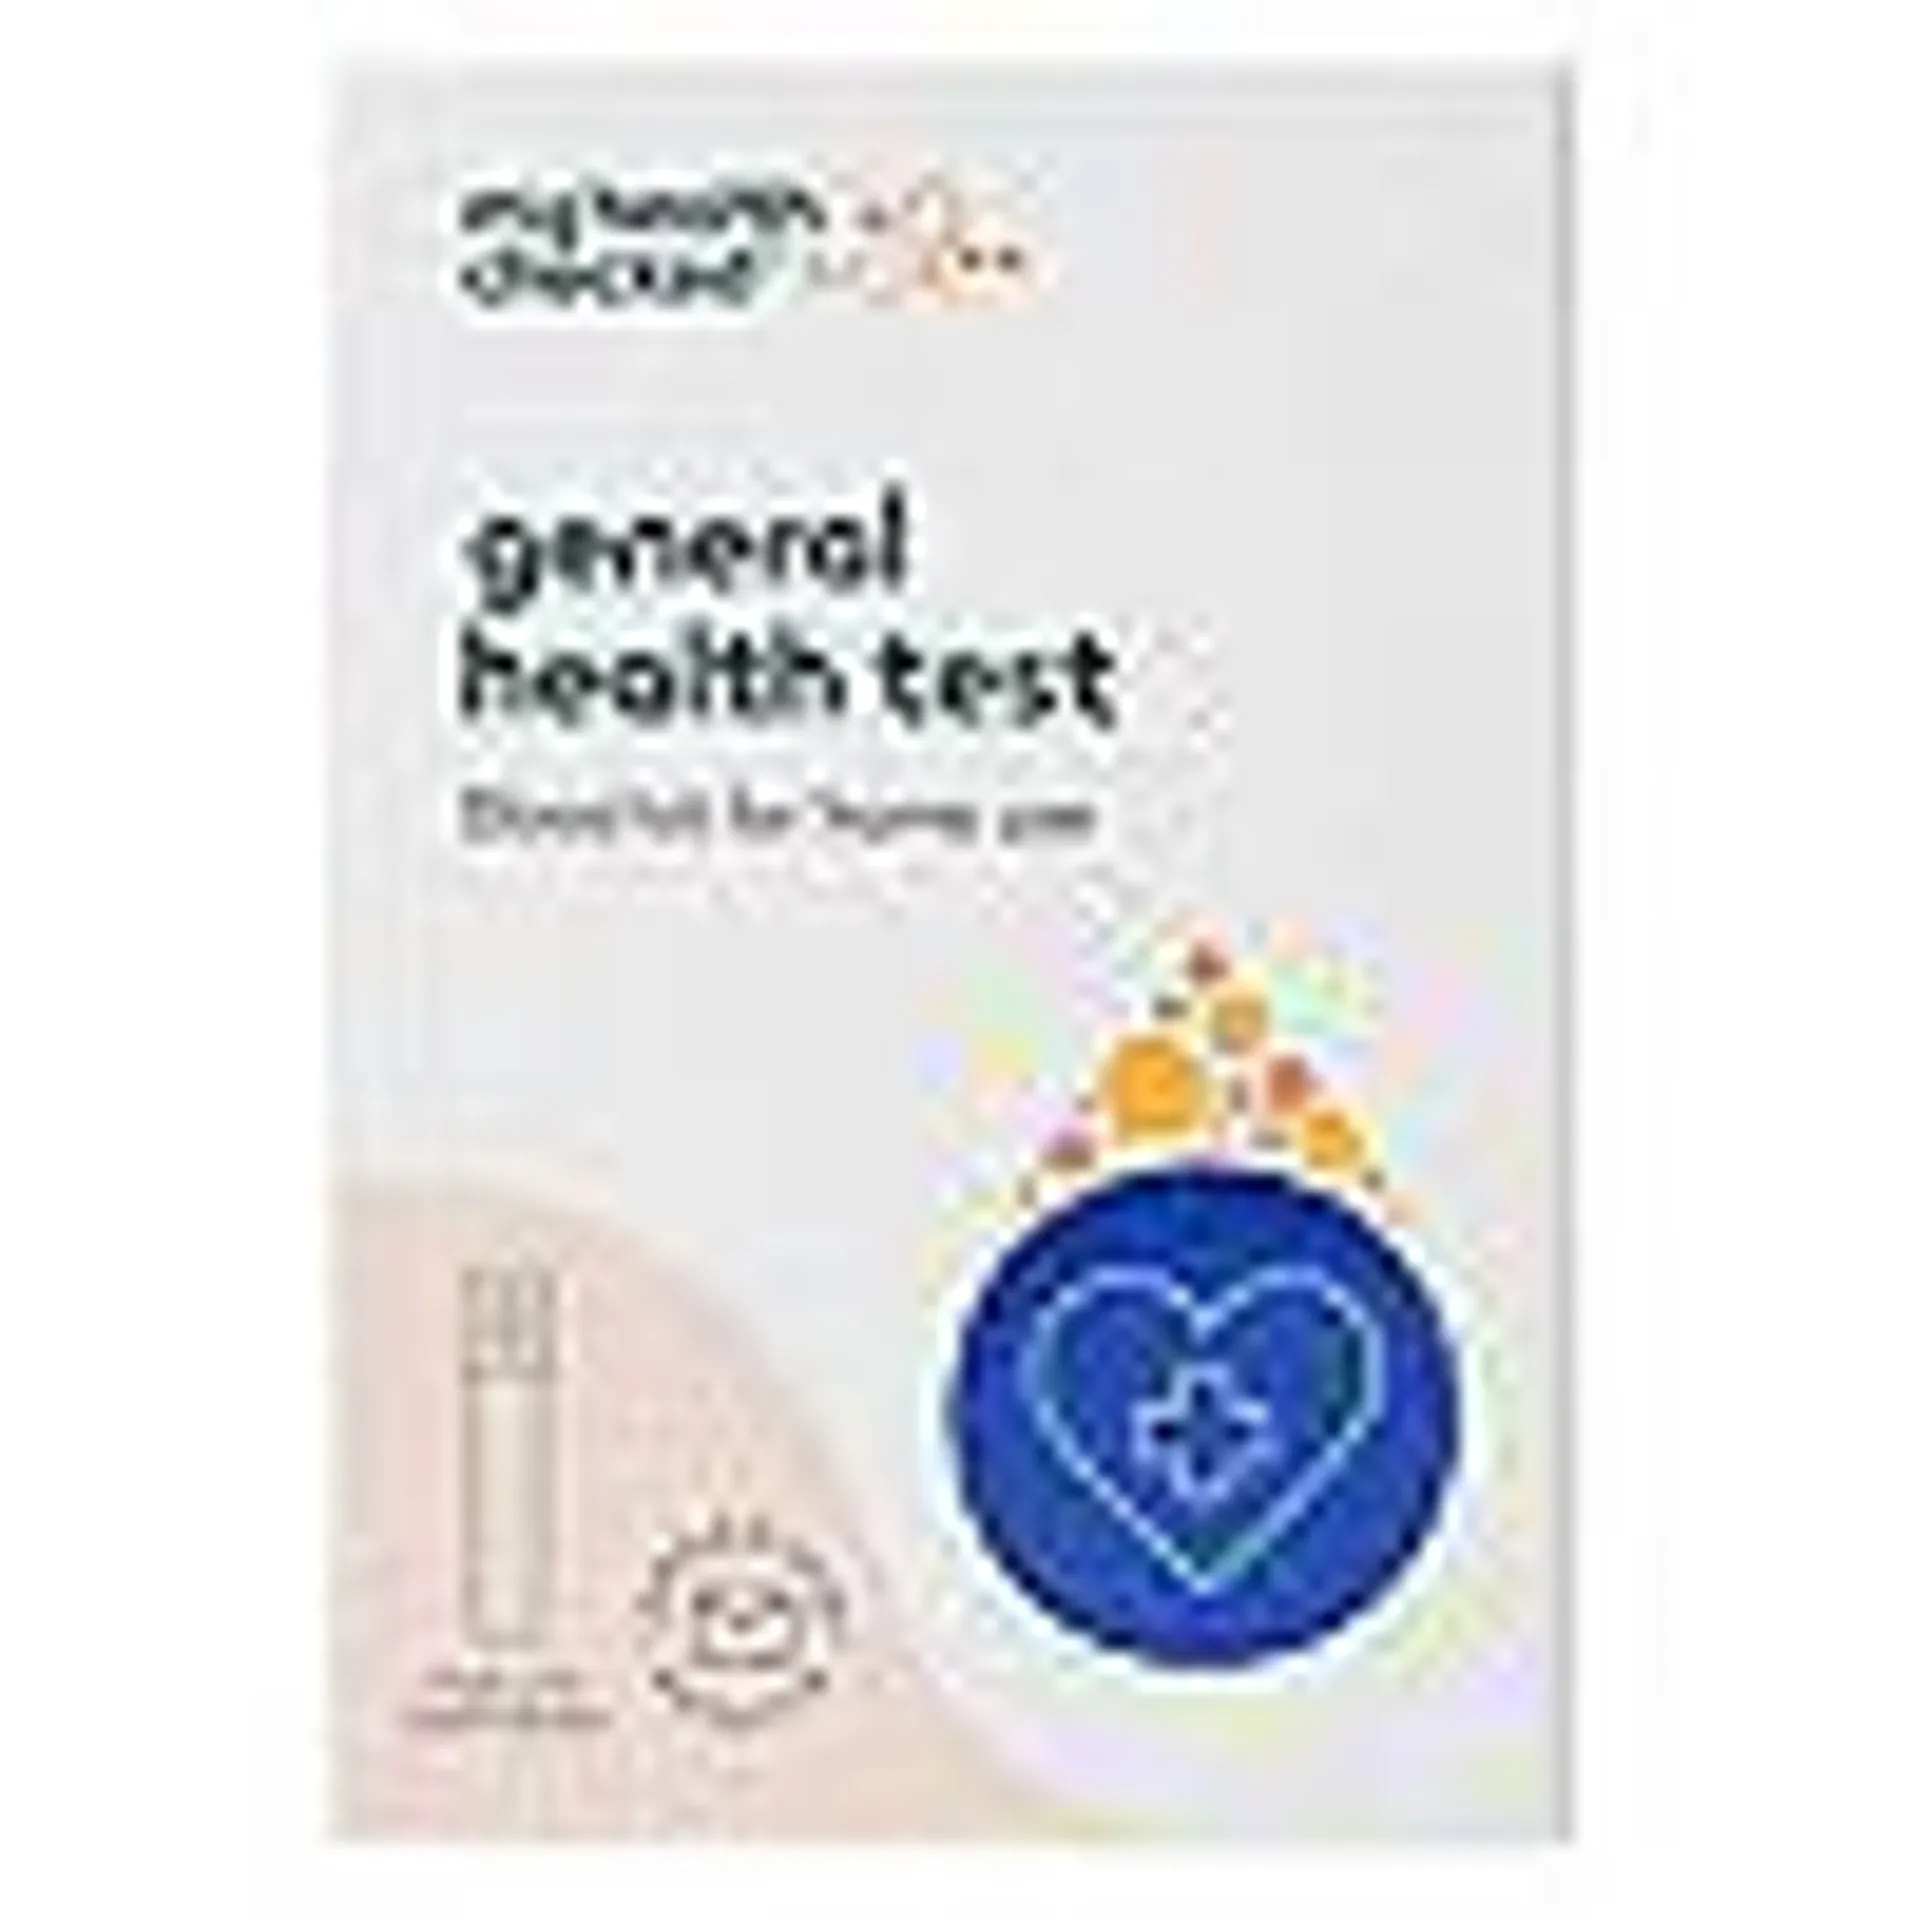 MyHealthChecked General Health Blood Test